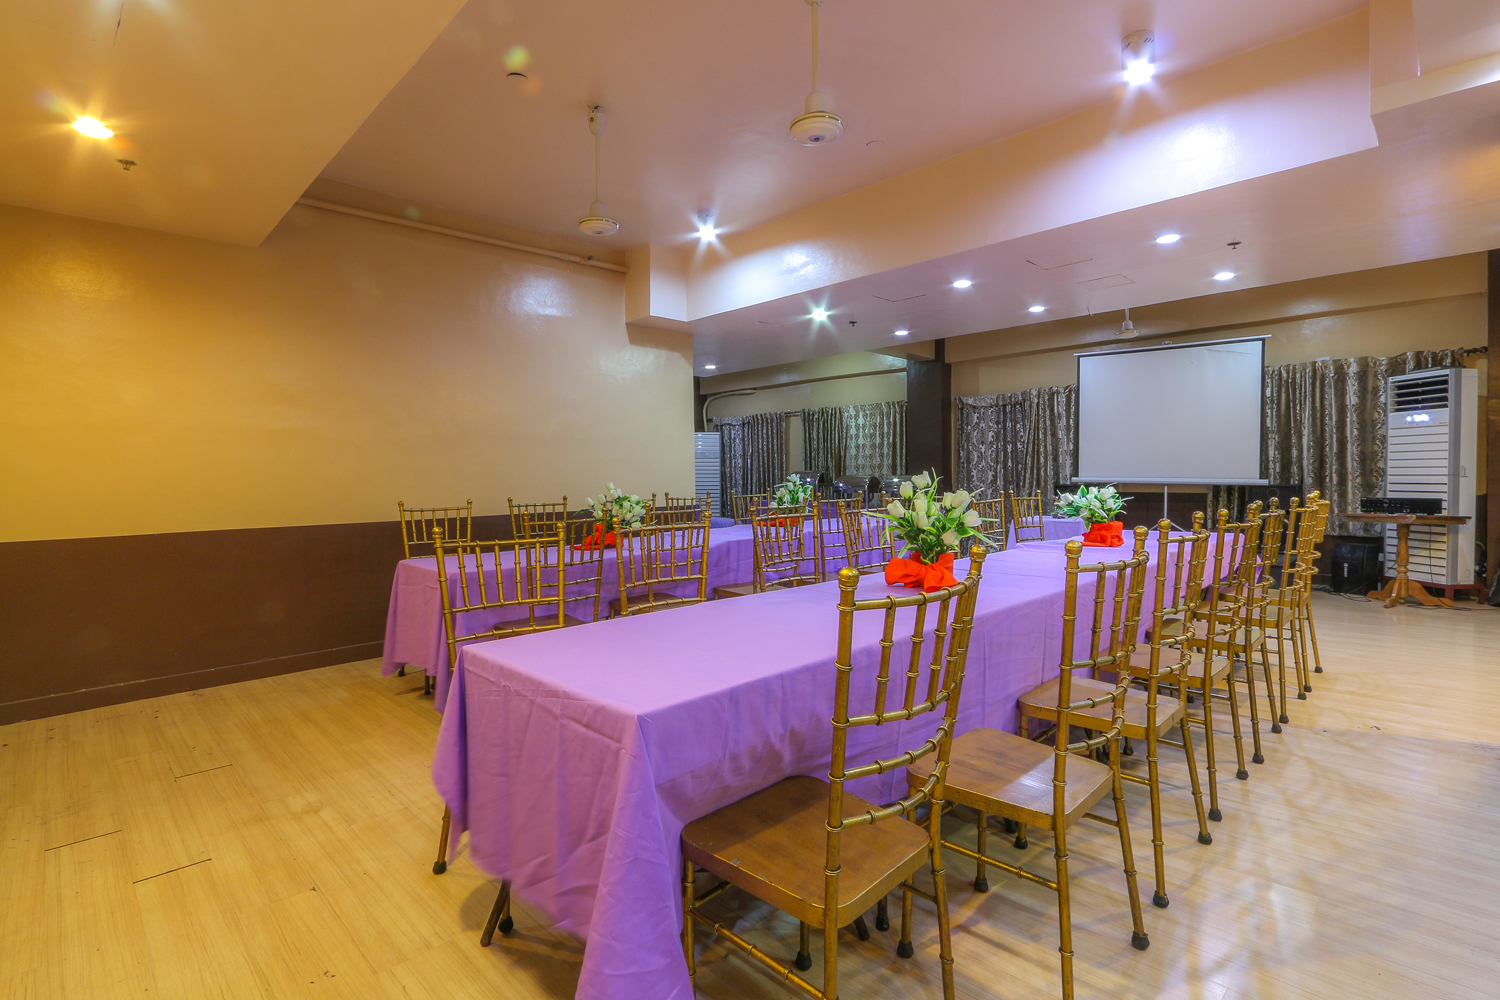 www.rooms498.com - VENUE & CATERING EVENTS & PARTY VENUE VENUE, ALL-IN PACKAGES - WEDDING DEBUT BAPTISMAL BIRTHDAY